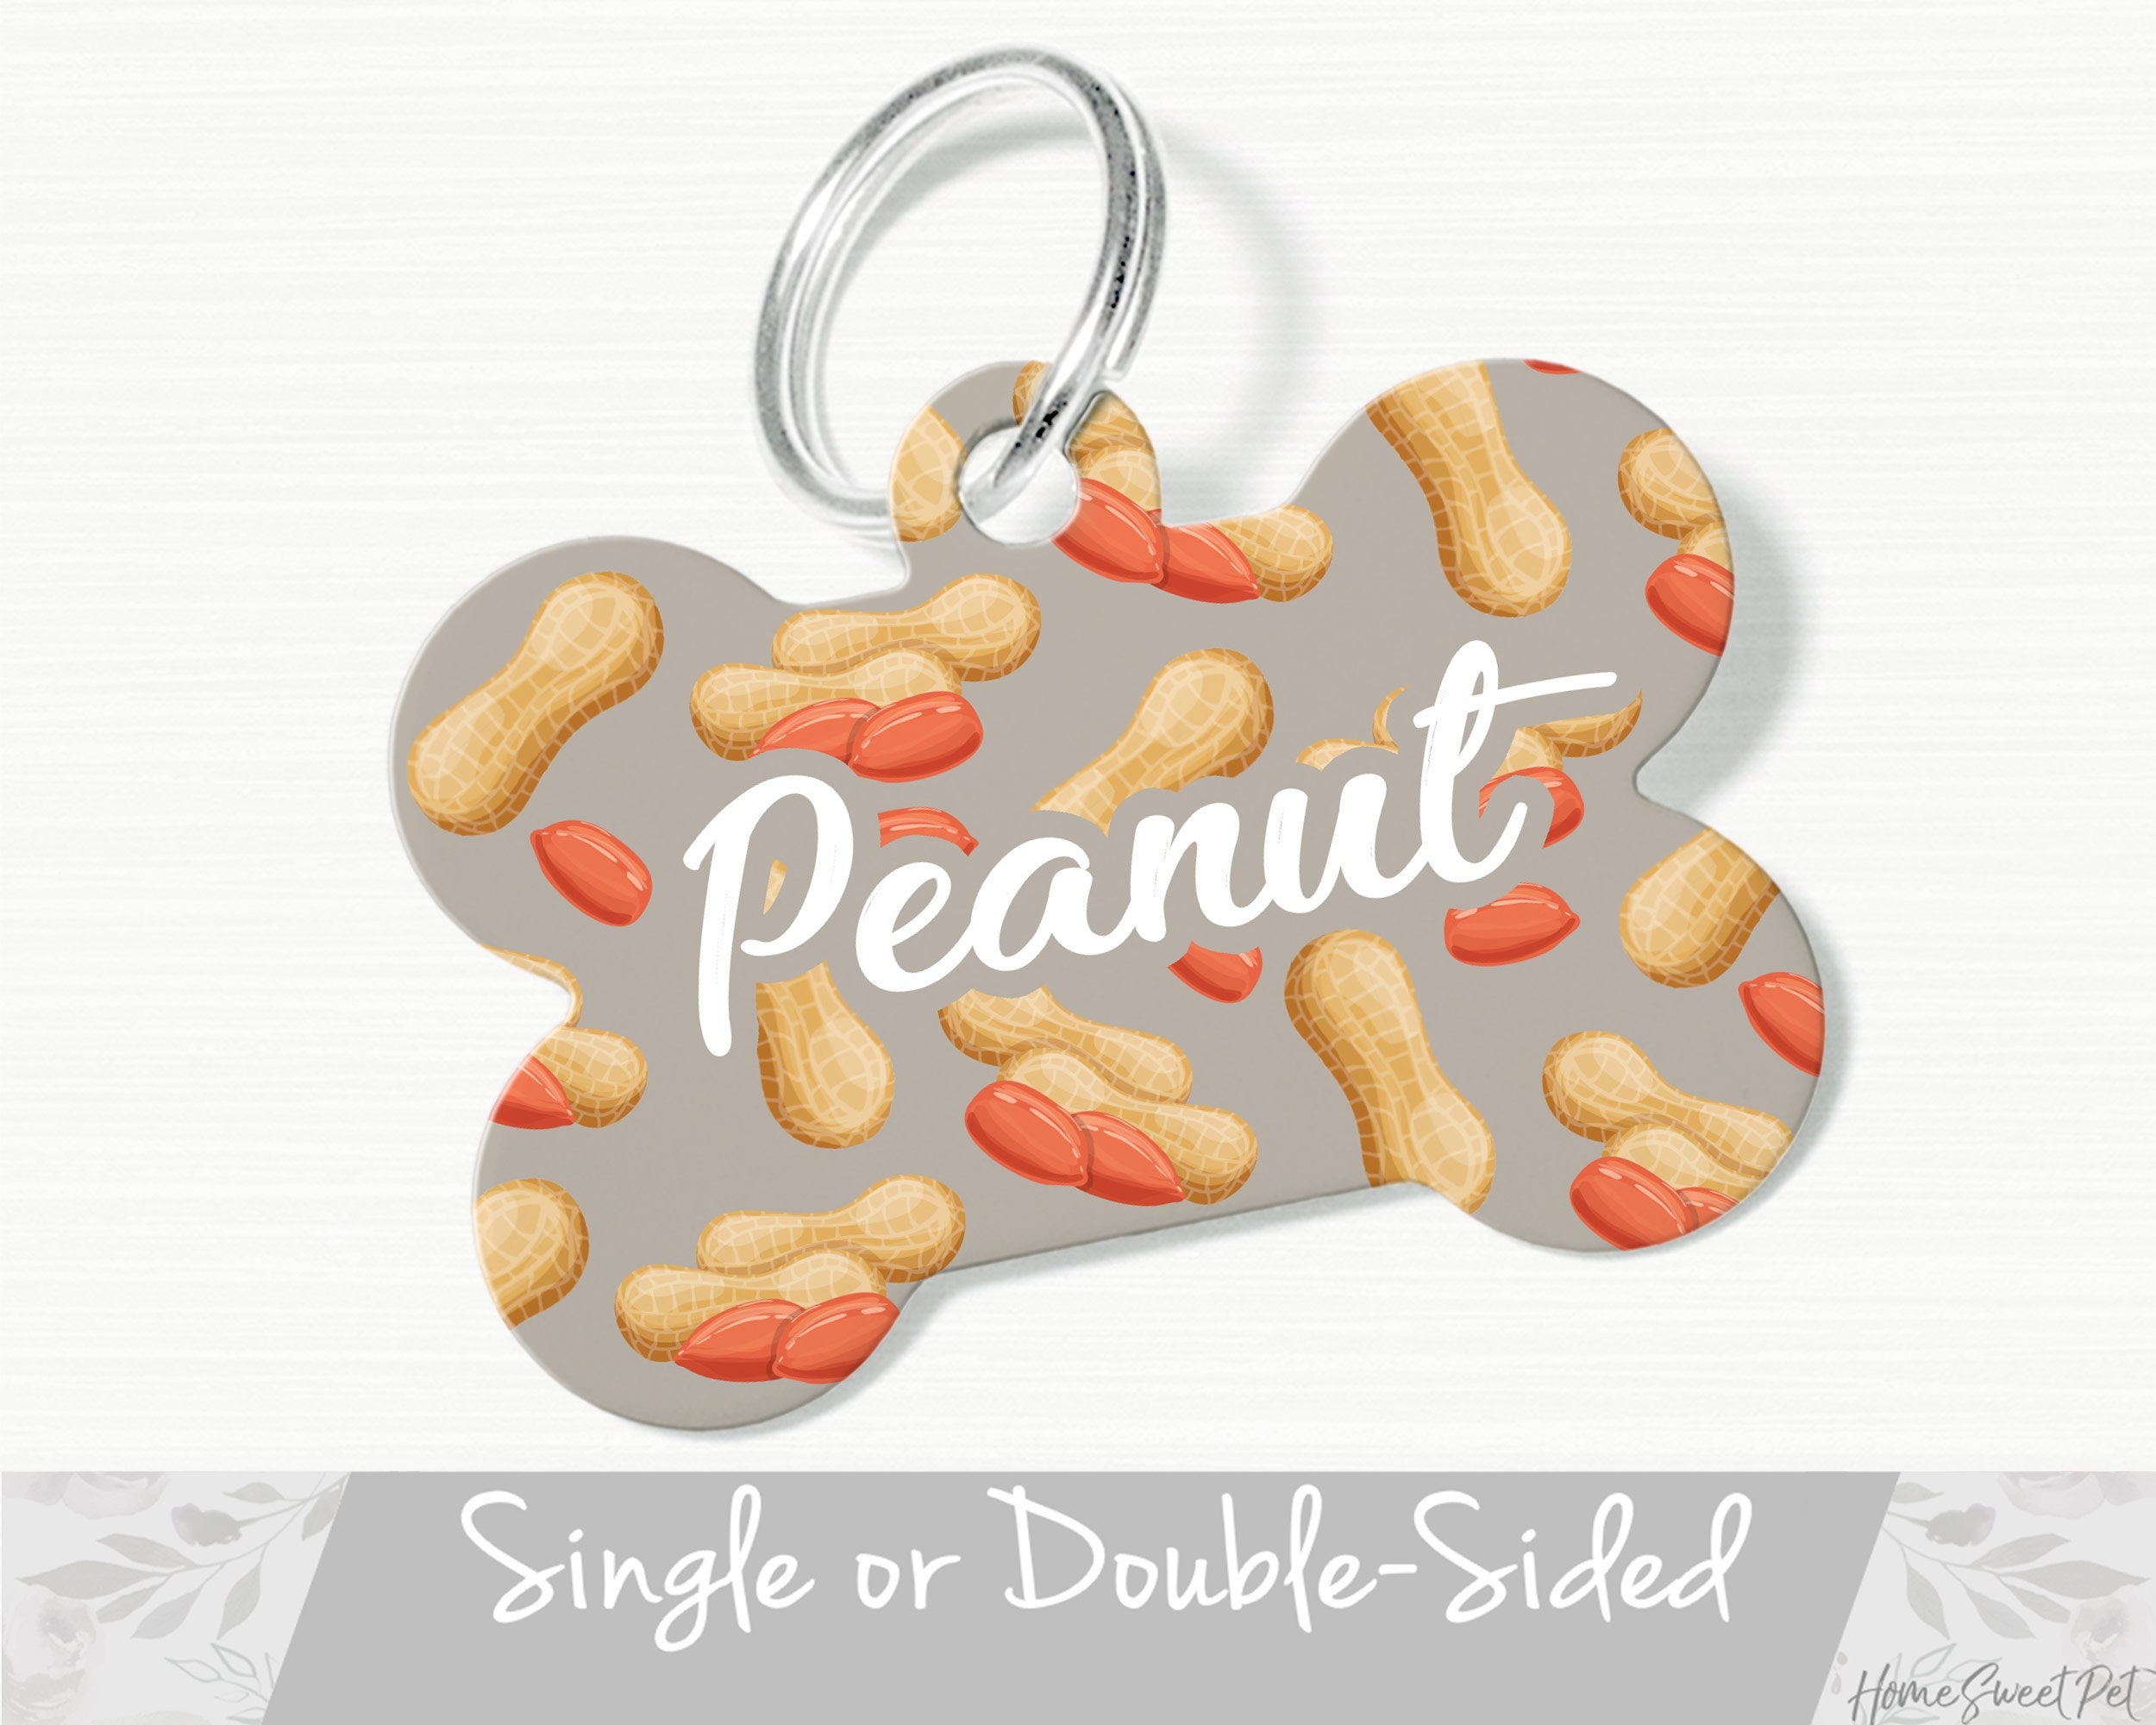 Peanut shaped #5 Metal Zipper pull with slider - Nickel Silver, Made in  Korea (ZIPPPERS 1)